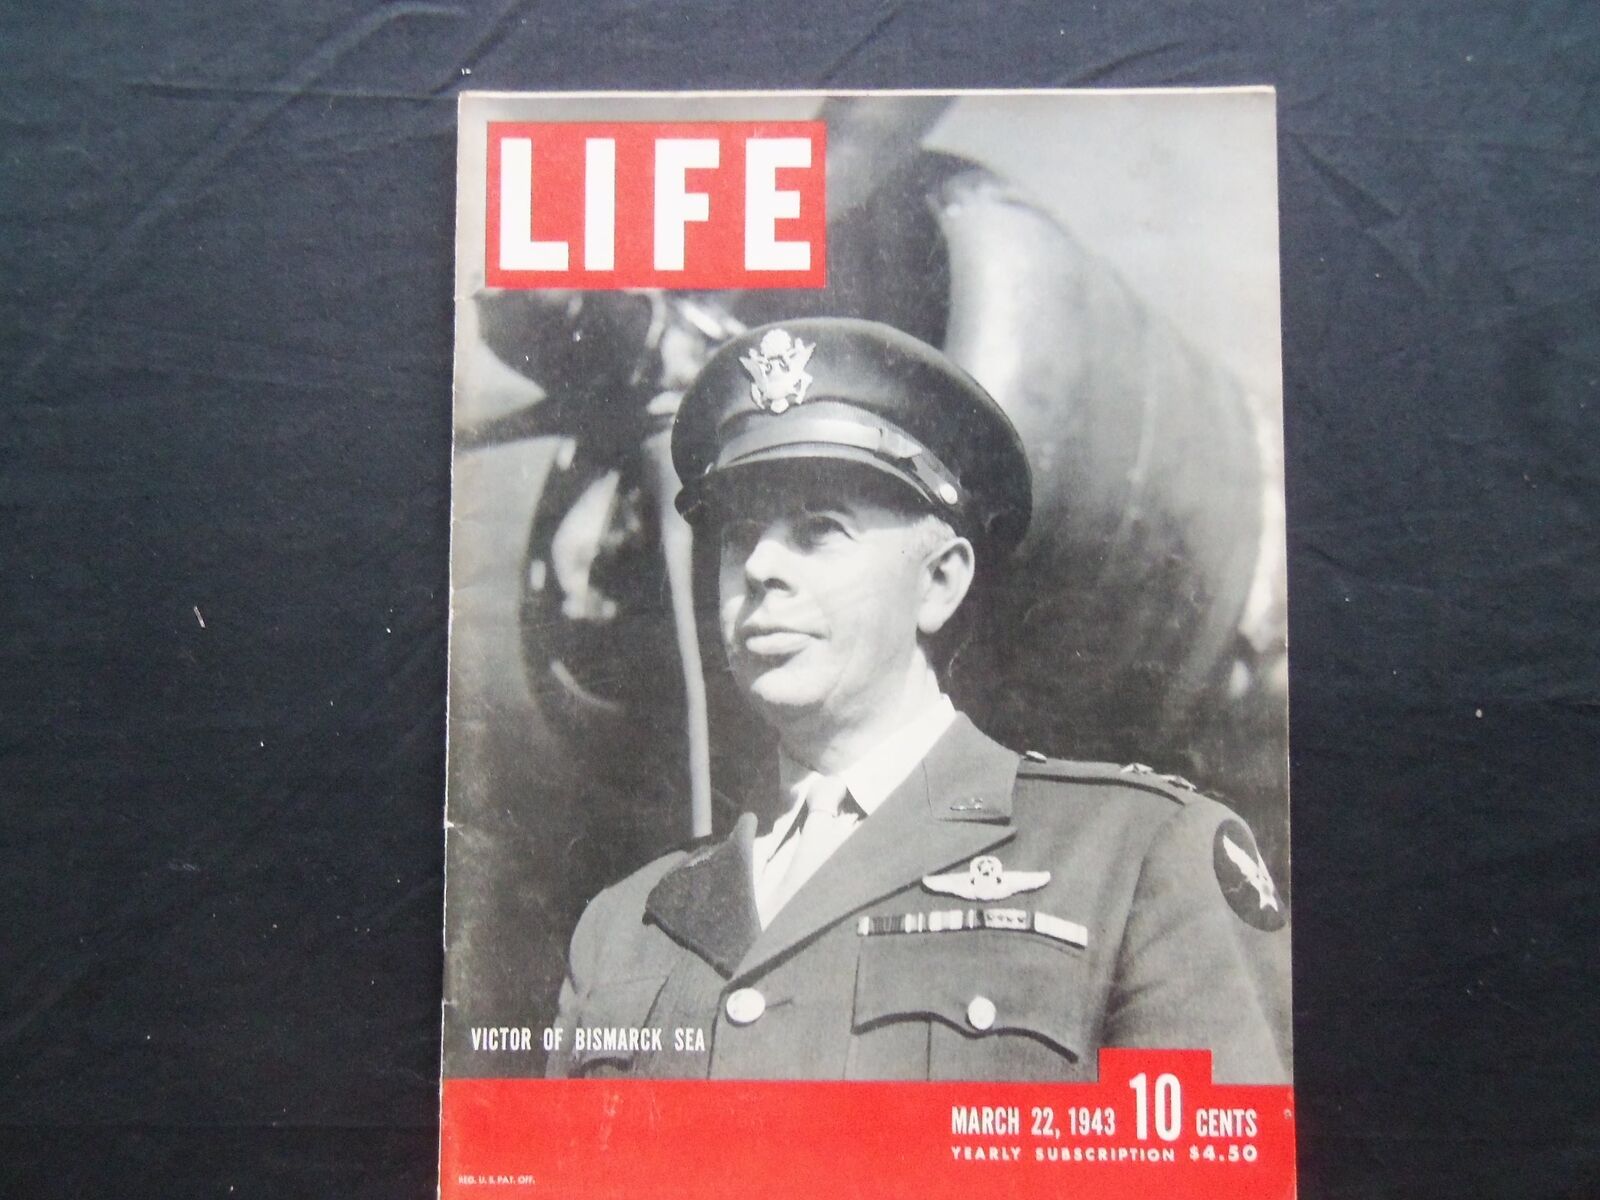 1943 MARCH 22 LIFE MAGAZINE - GENERAL GEORGE KENNEY - L 331